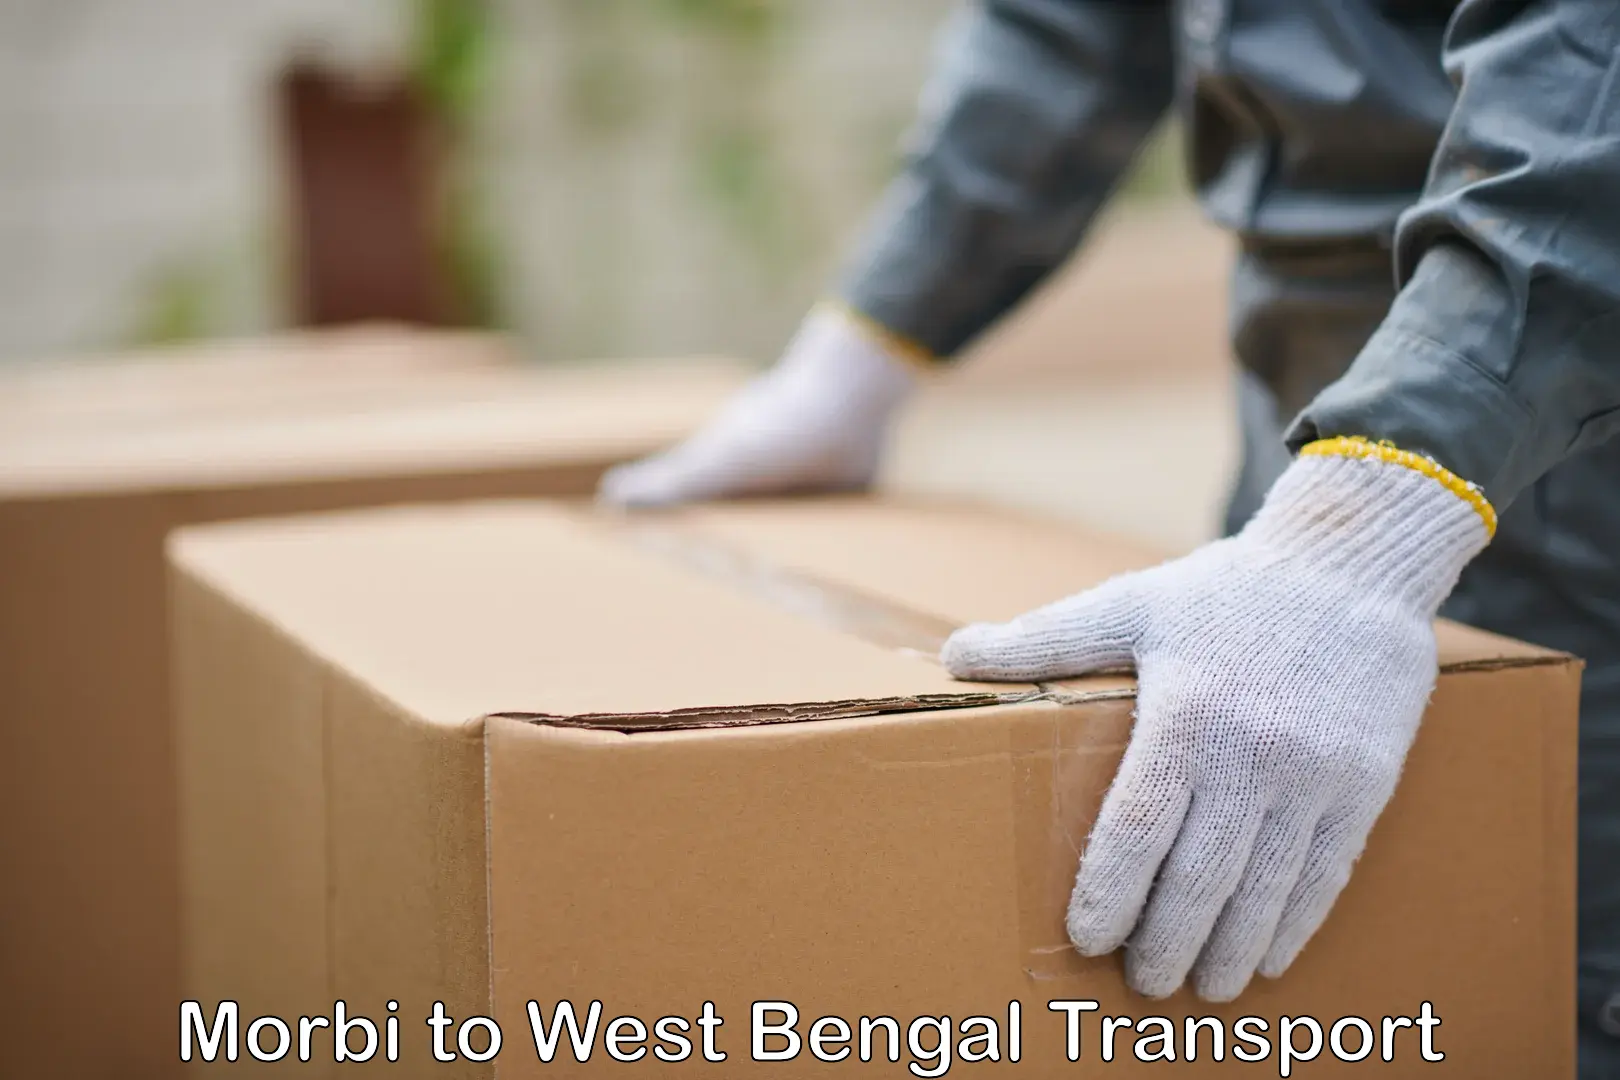 Cycle transportation service Morbi to West Bengal